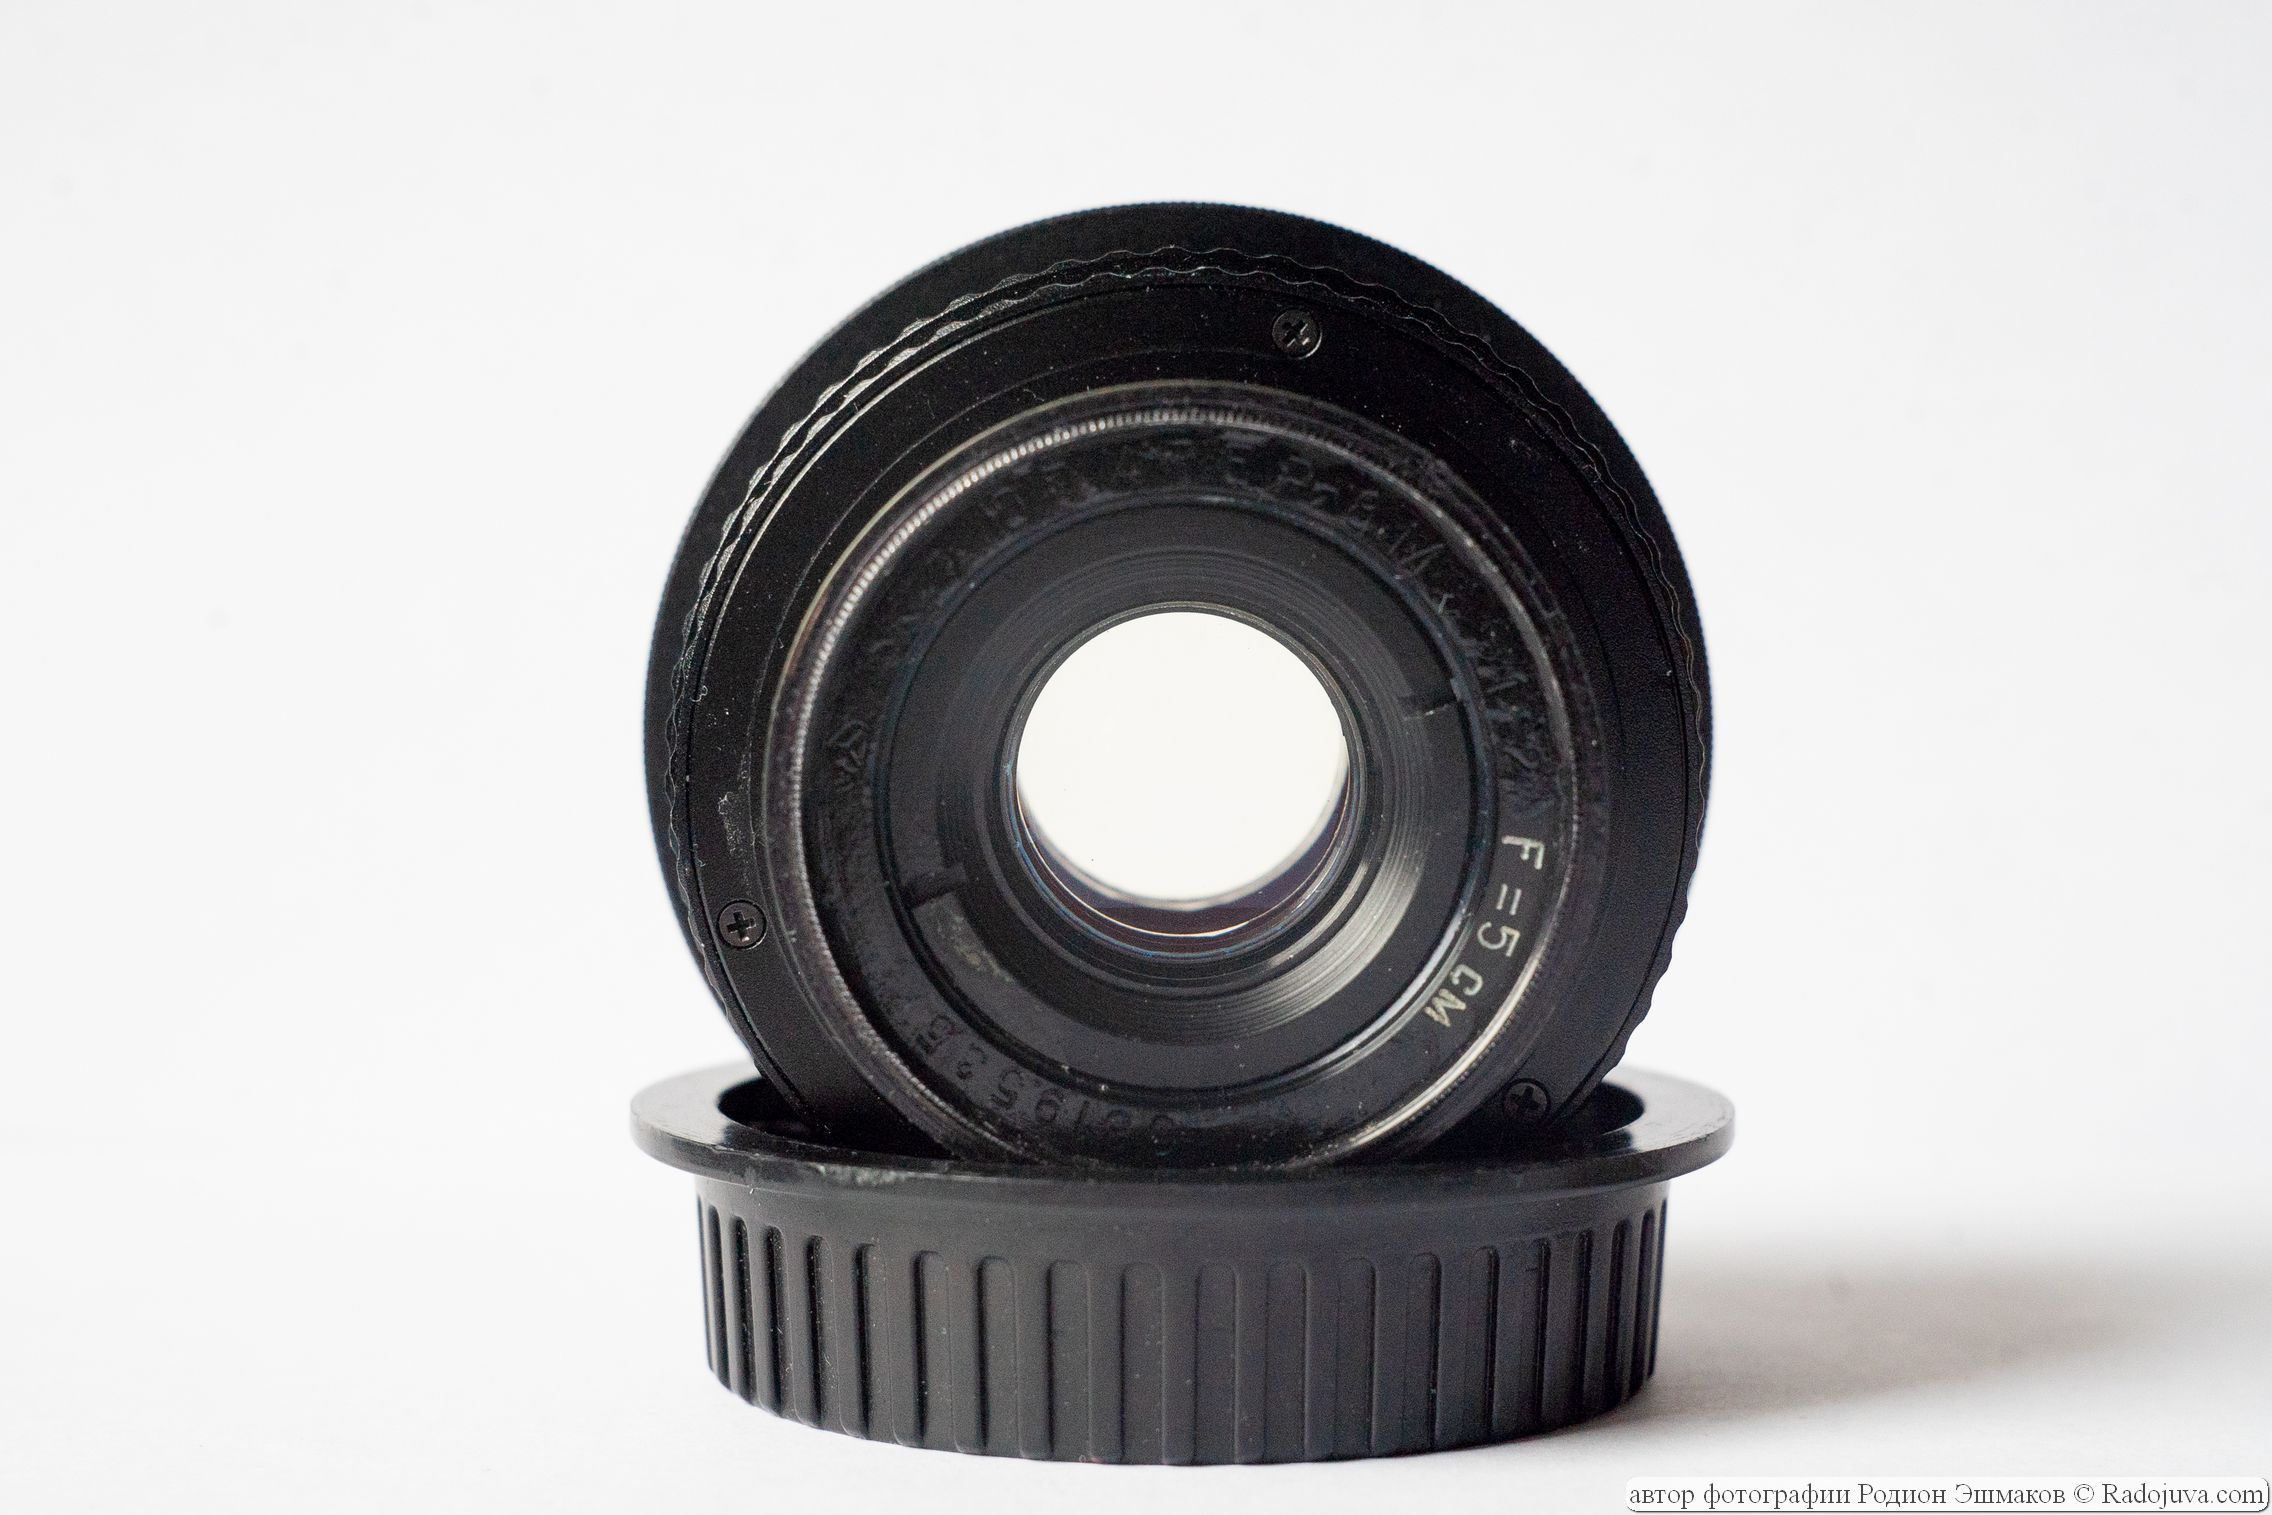 View of the lens through the open aperture.